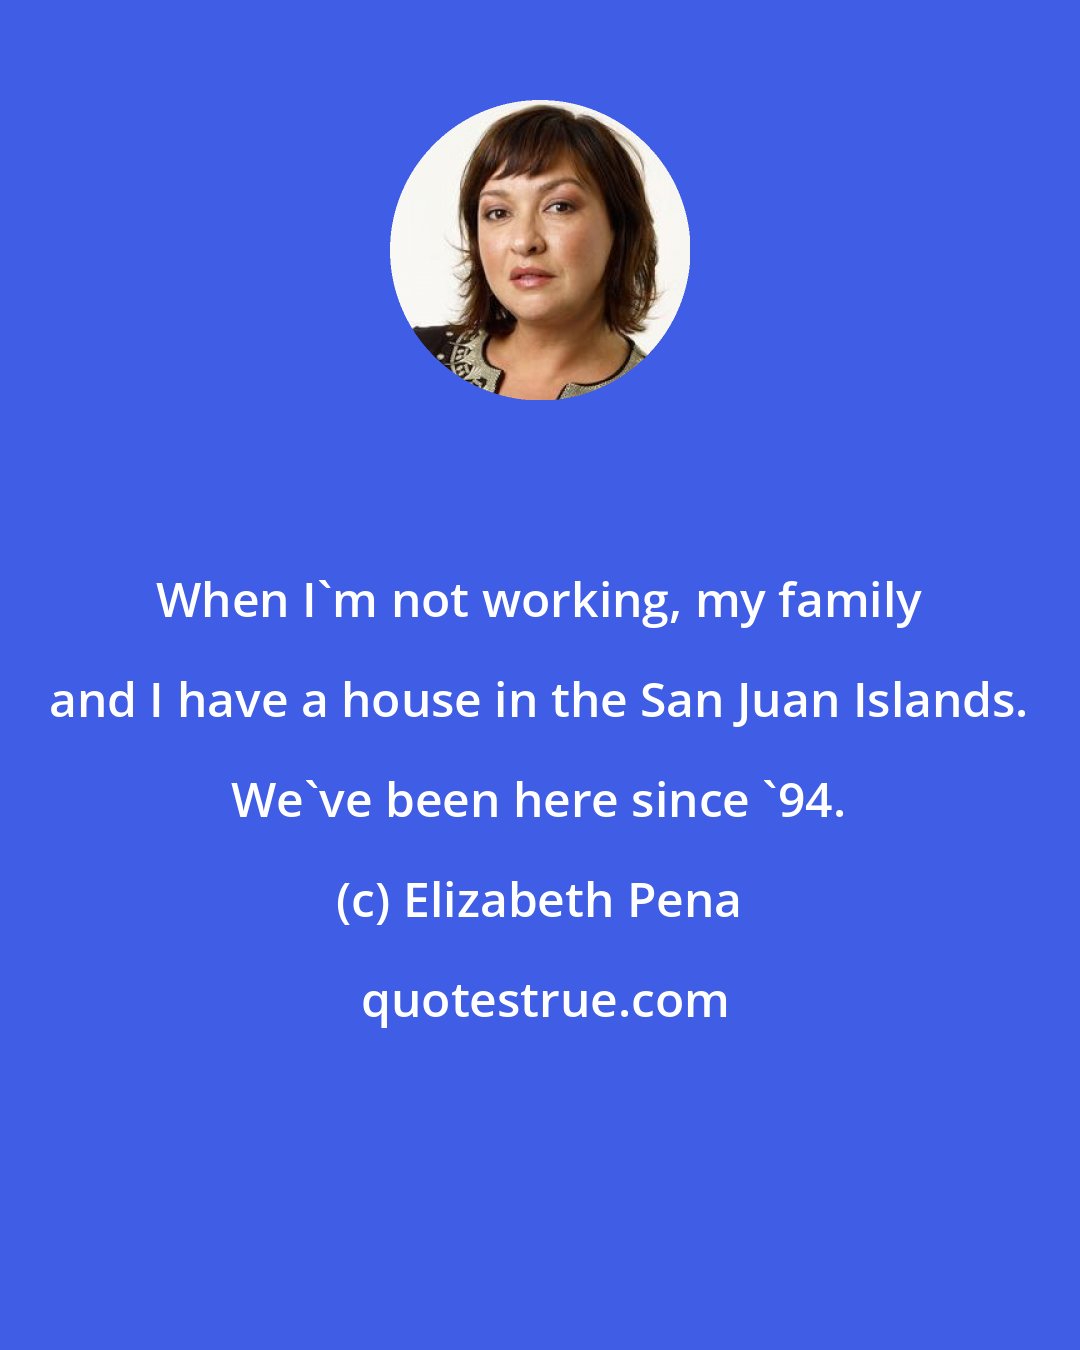 Elizabeth Pena: When I'm not working, my family and I have a house in the San Juan Islands. We've been here since '94.